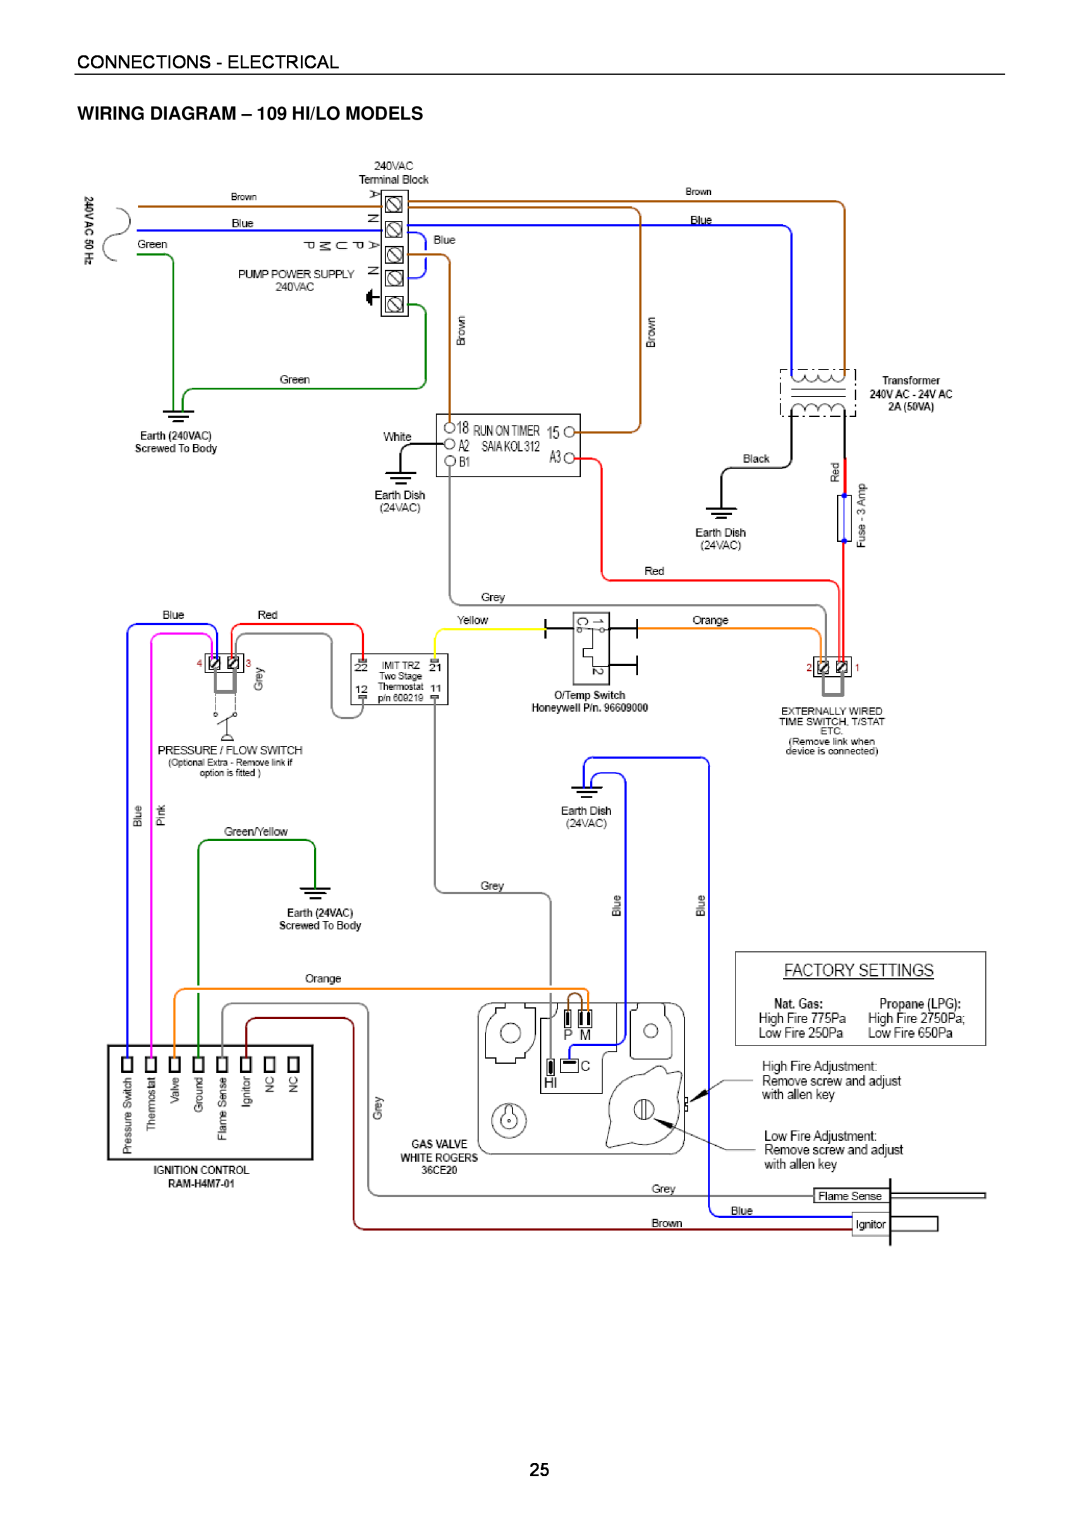 Raypak B0109, B0147 installation instructions WIRING DIAGRAM - 109 HI/LO MODELS, Connections - Electrical 